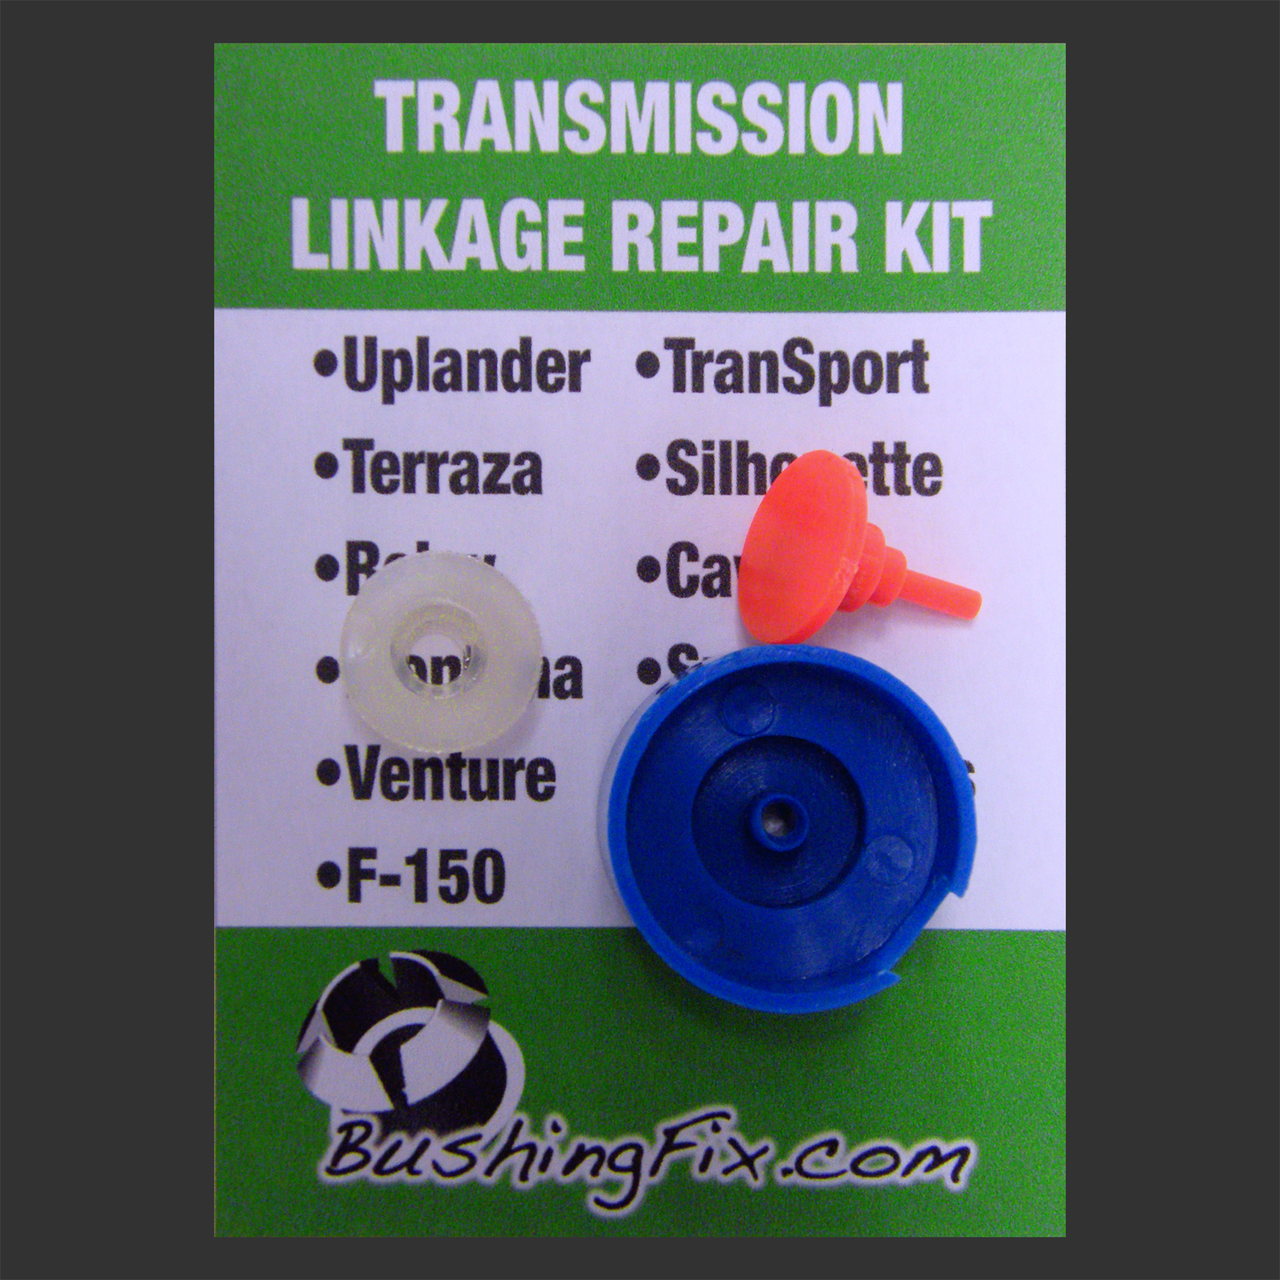 UP1KIT repairs the bushing or shift cable grommet